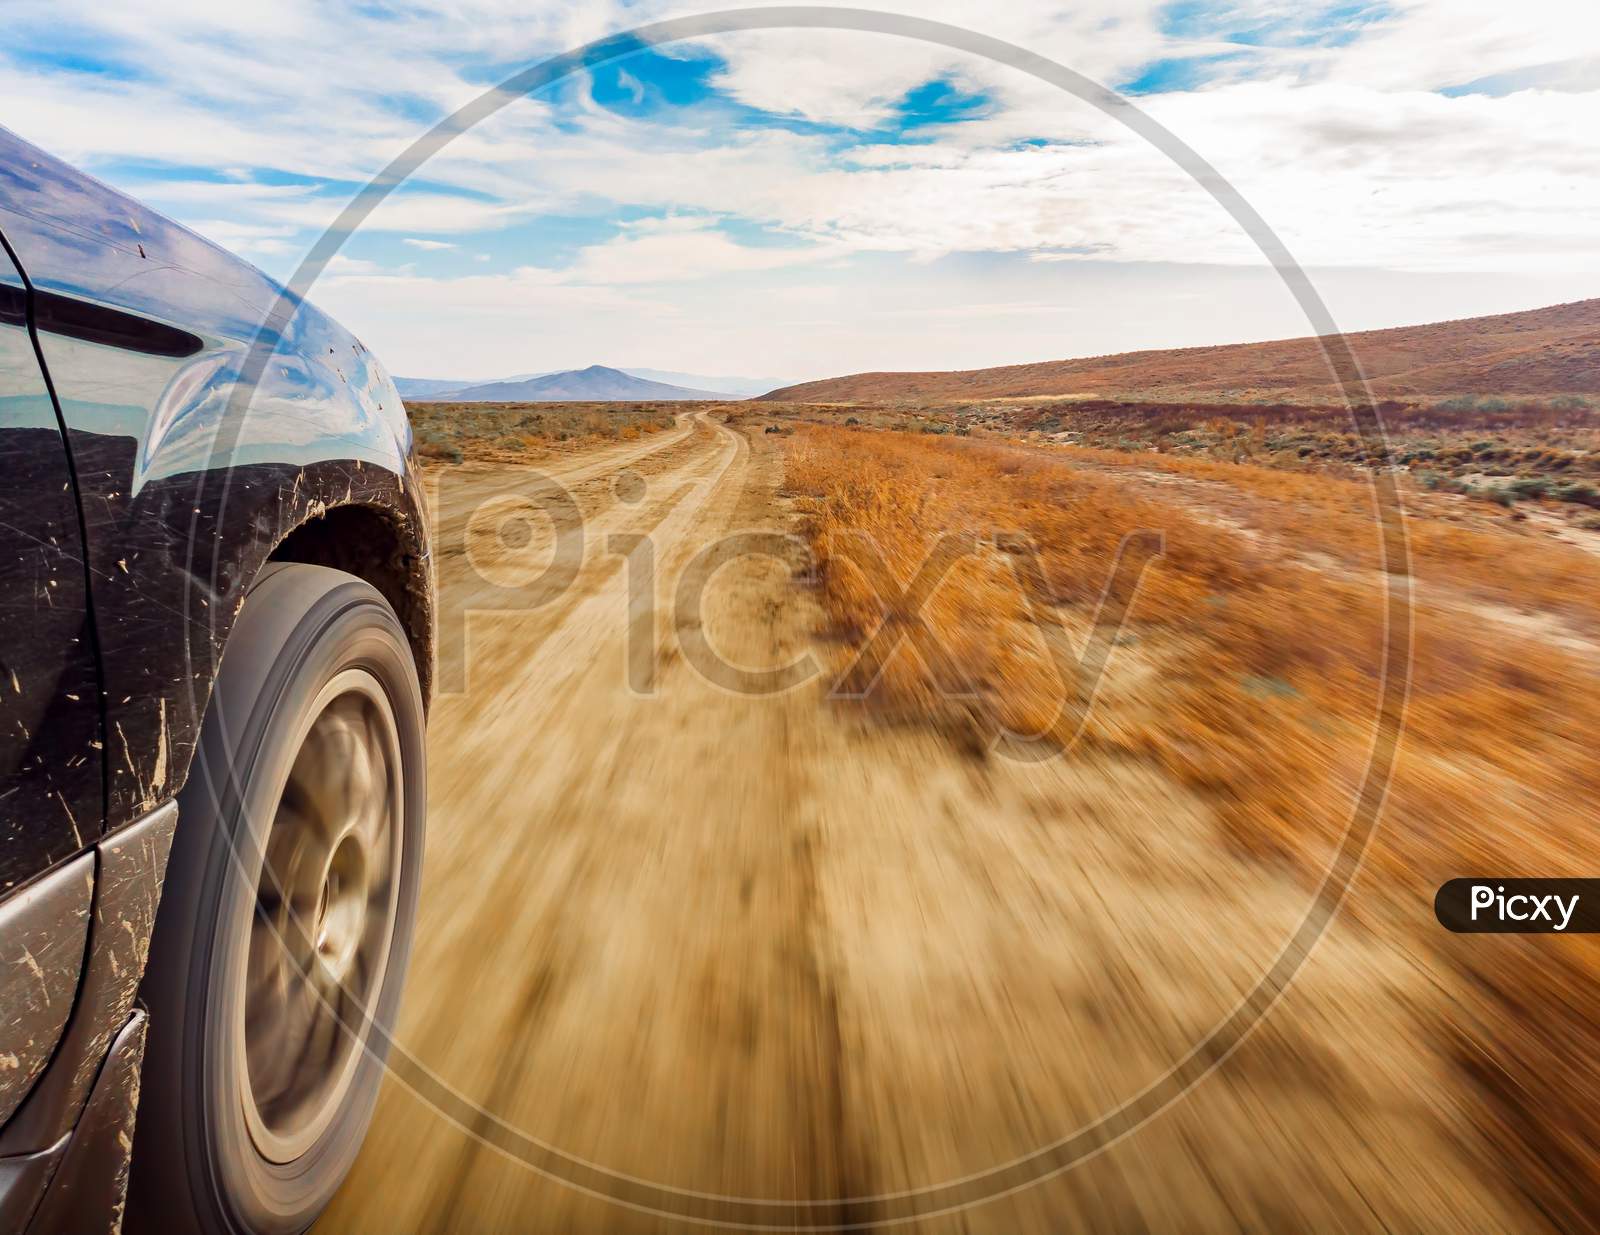 Close Up Of 4X4 Car Wheels In Motion On The Road With Deserted Landscape Background